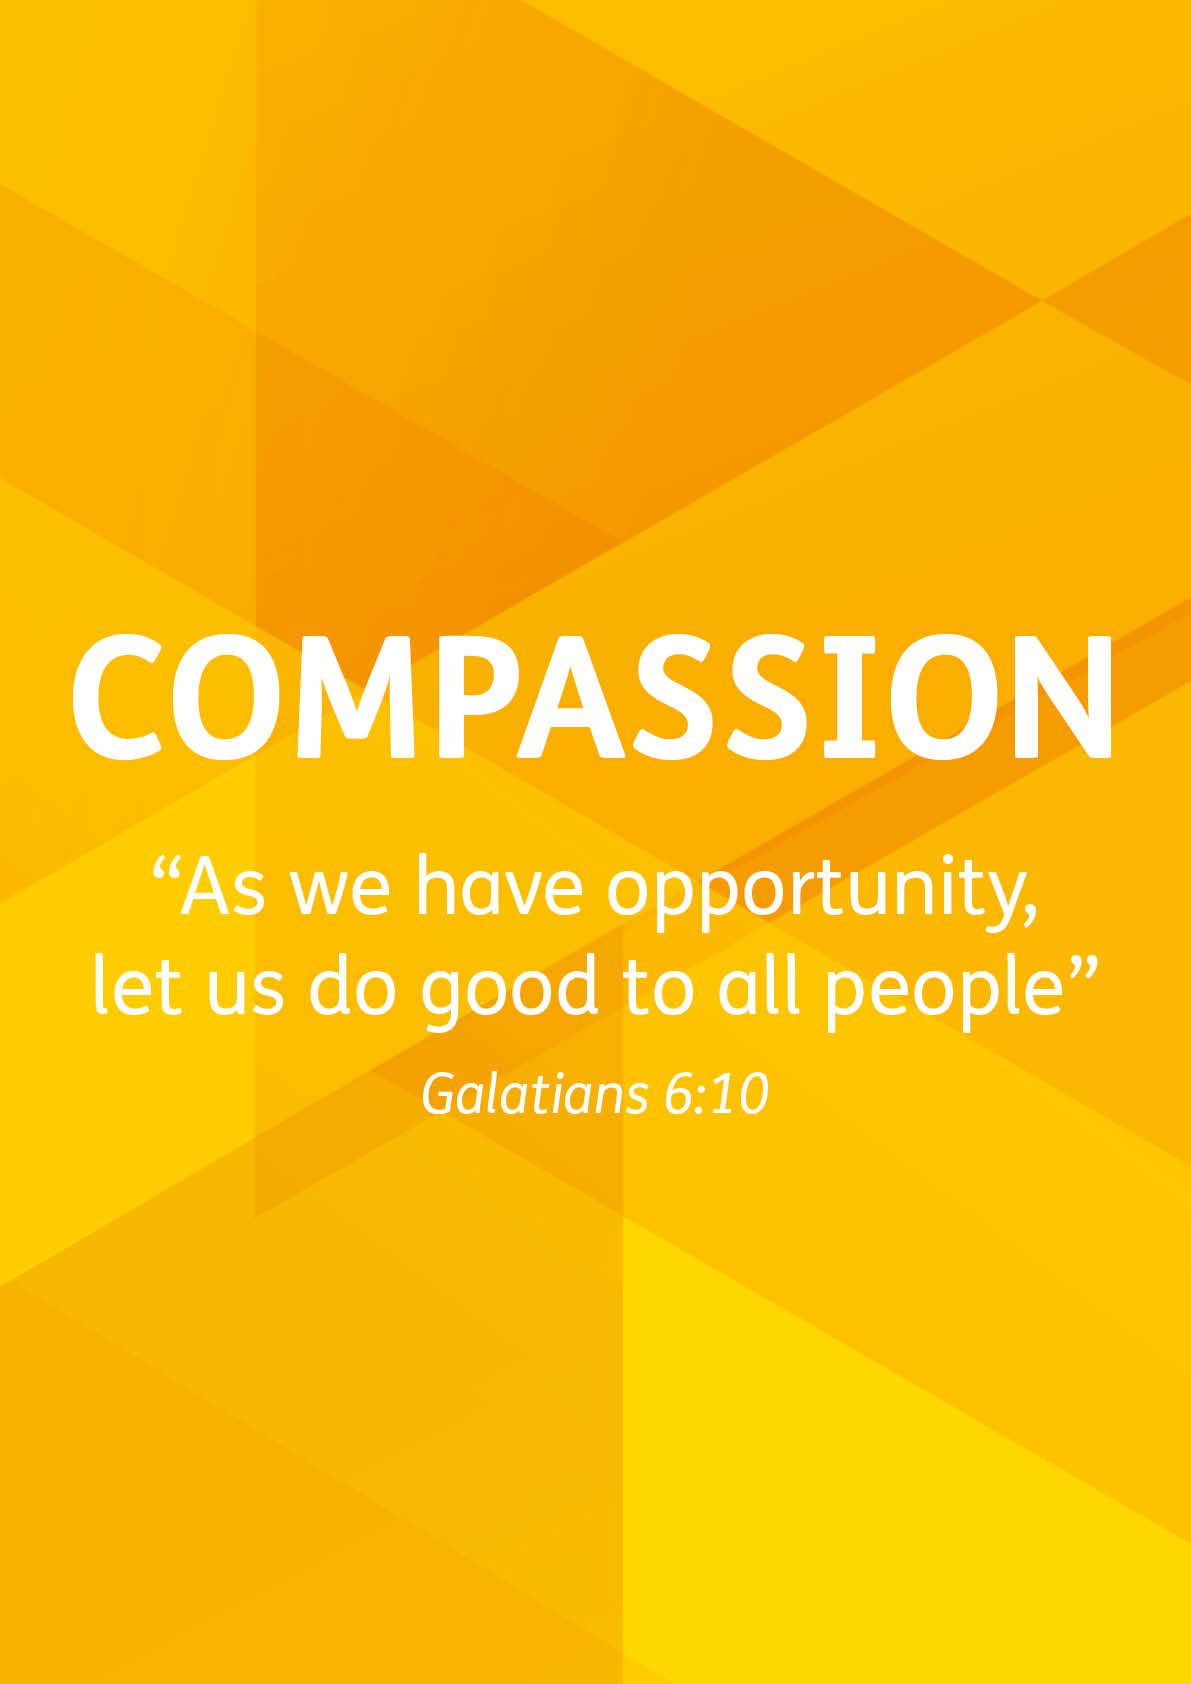 Compassion. “As we have opportunity, let us do good to all people” Galatians 6:10